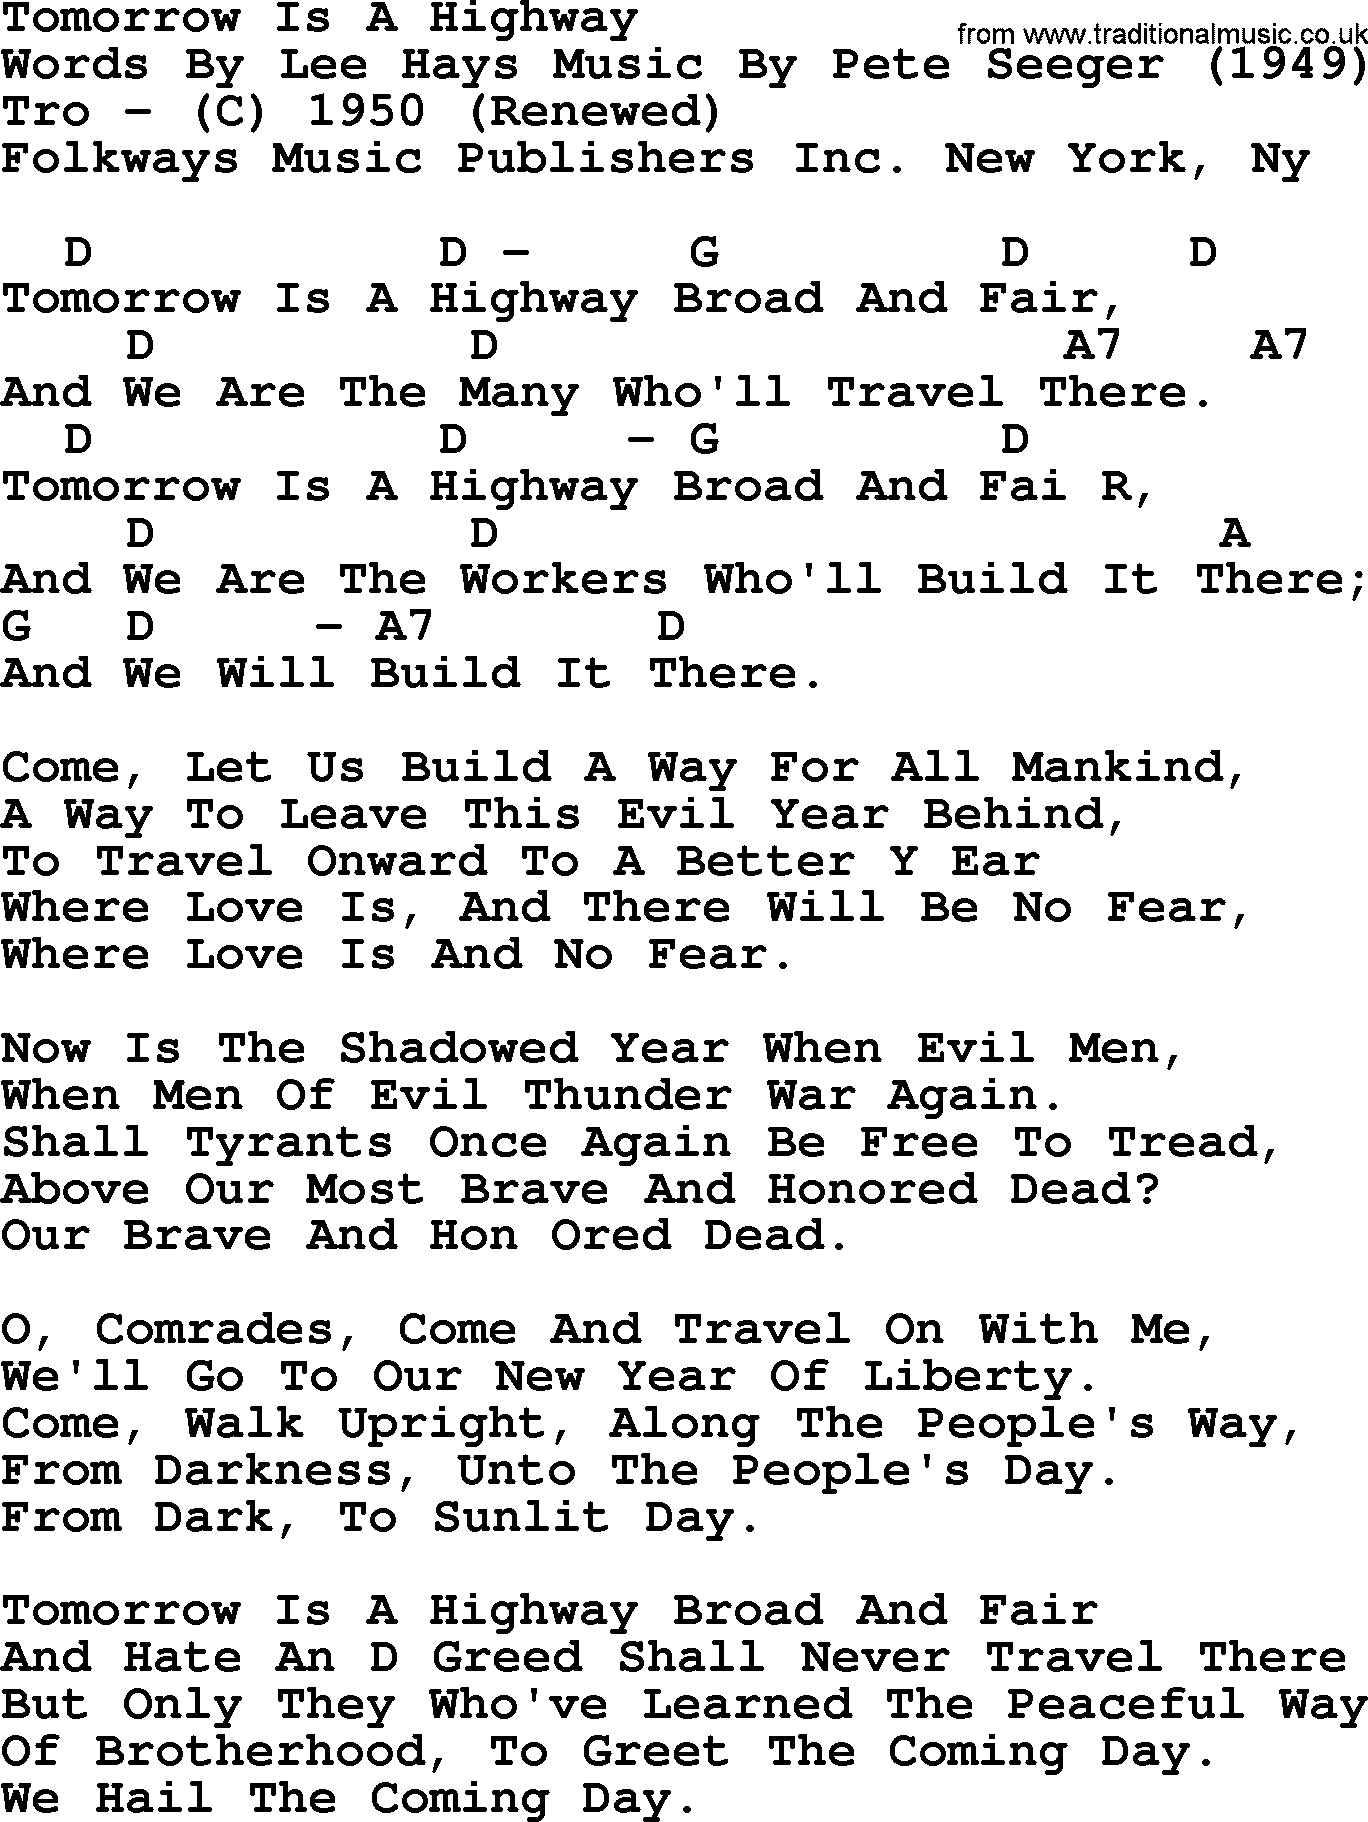 Pete Seeger song Tomorrow Is A Highway, lyrics and chords